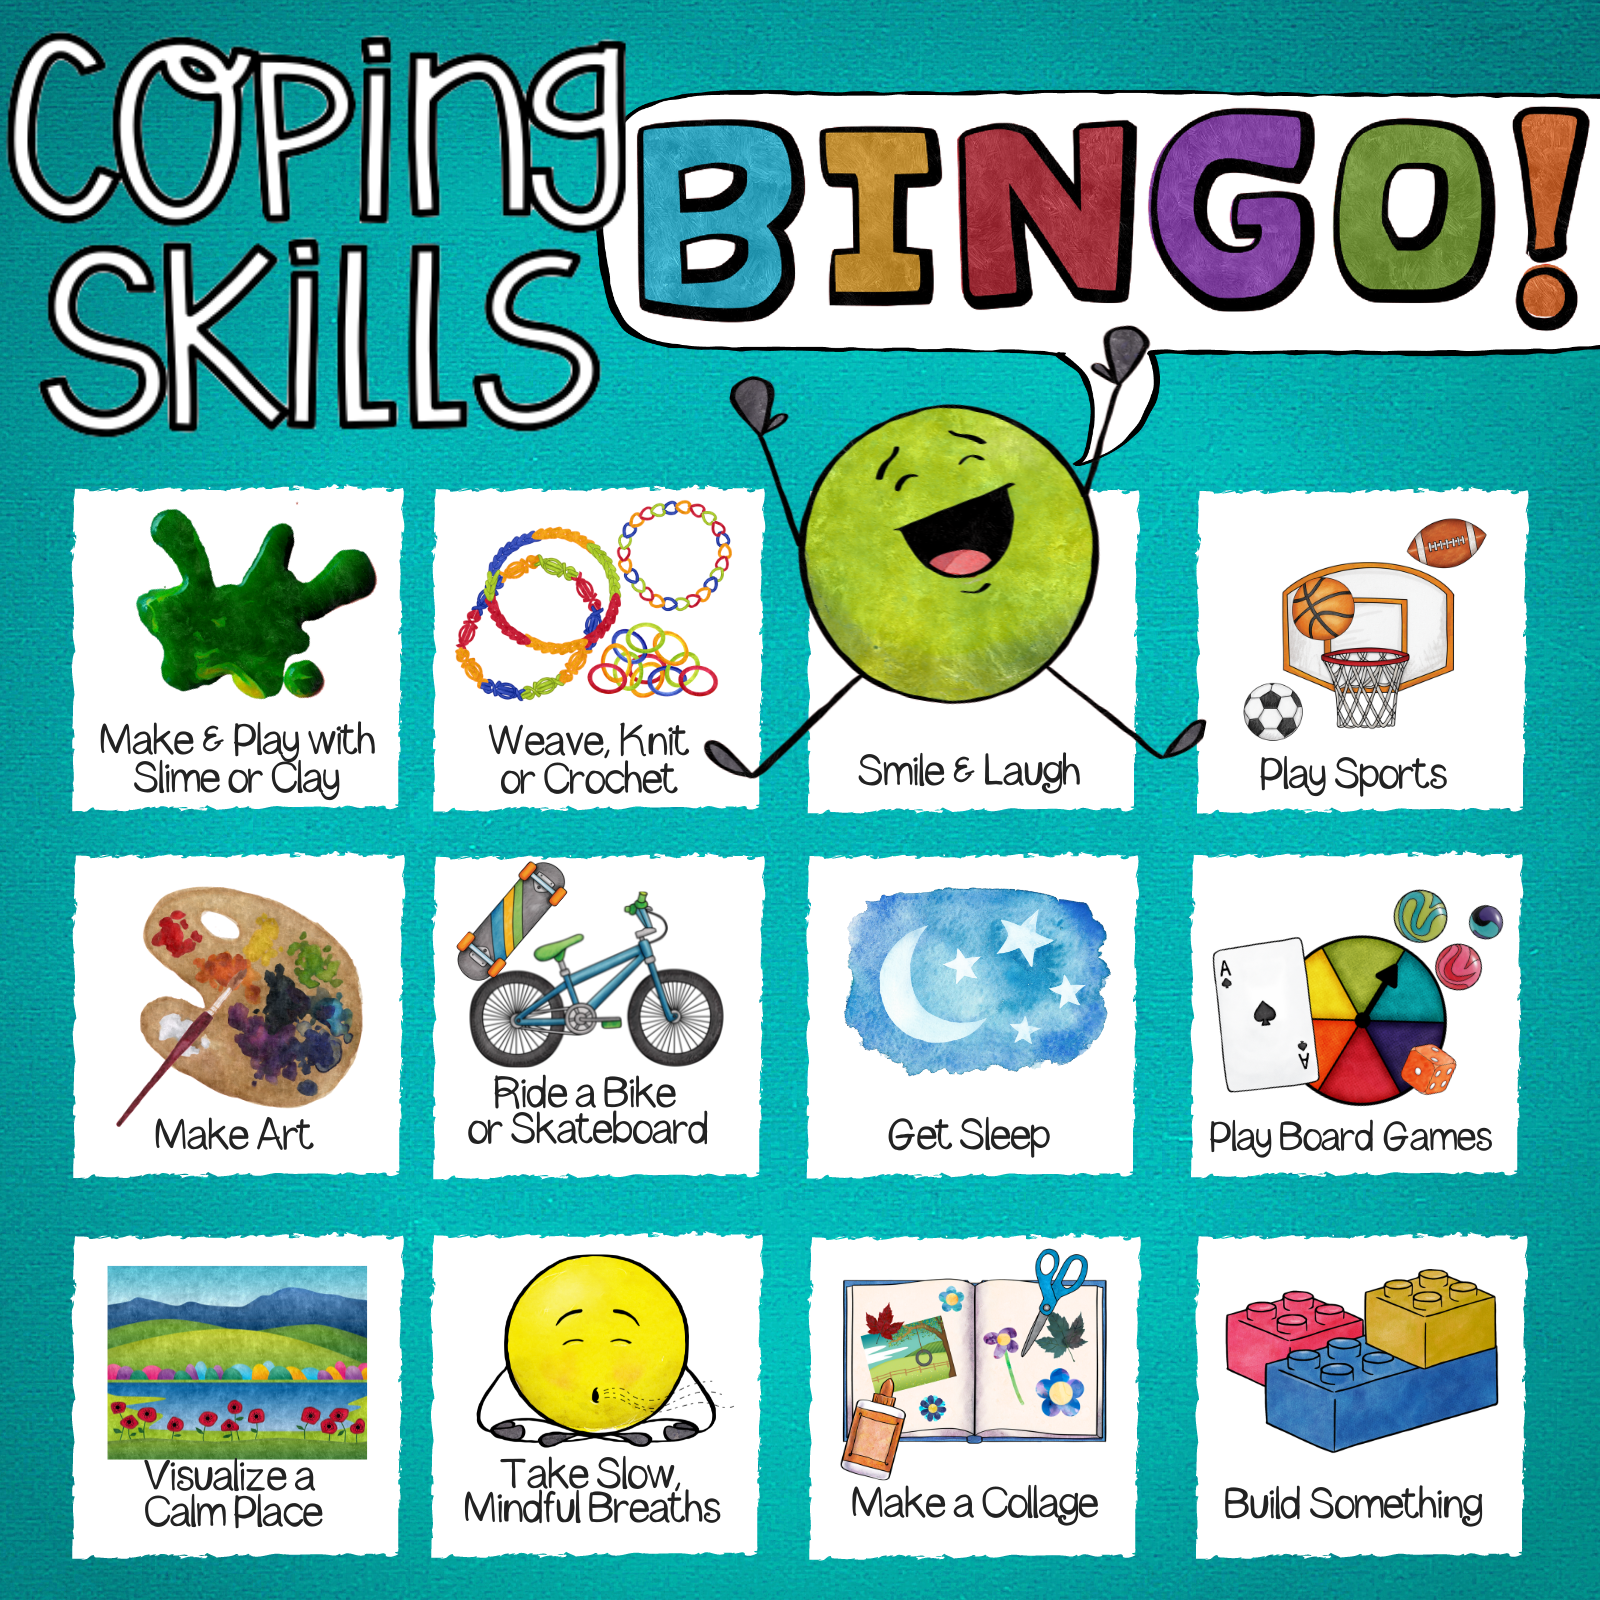 Coping Skills BINGO School Counseling Guidance Lesson and Small Group Game